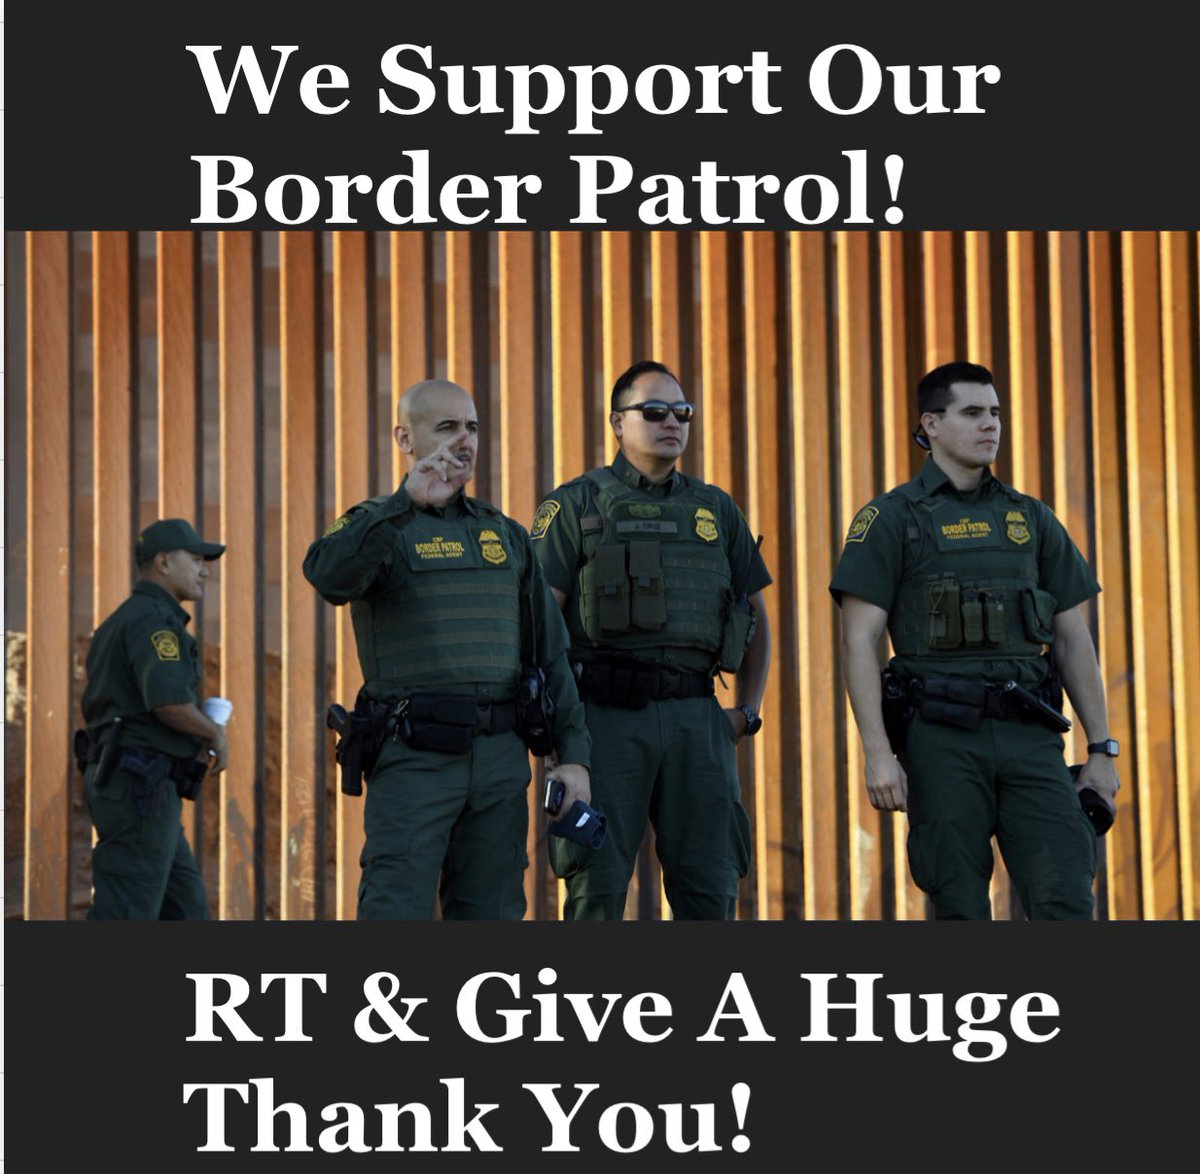 To all our Border Patrol Who Put Your Lives On The Line To Secure Our County! We Have Your Back!